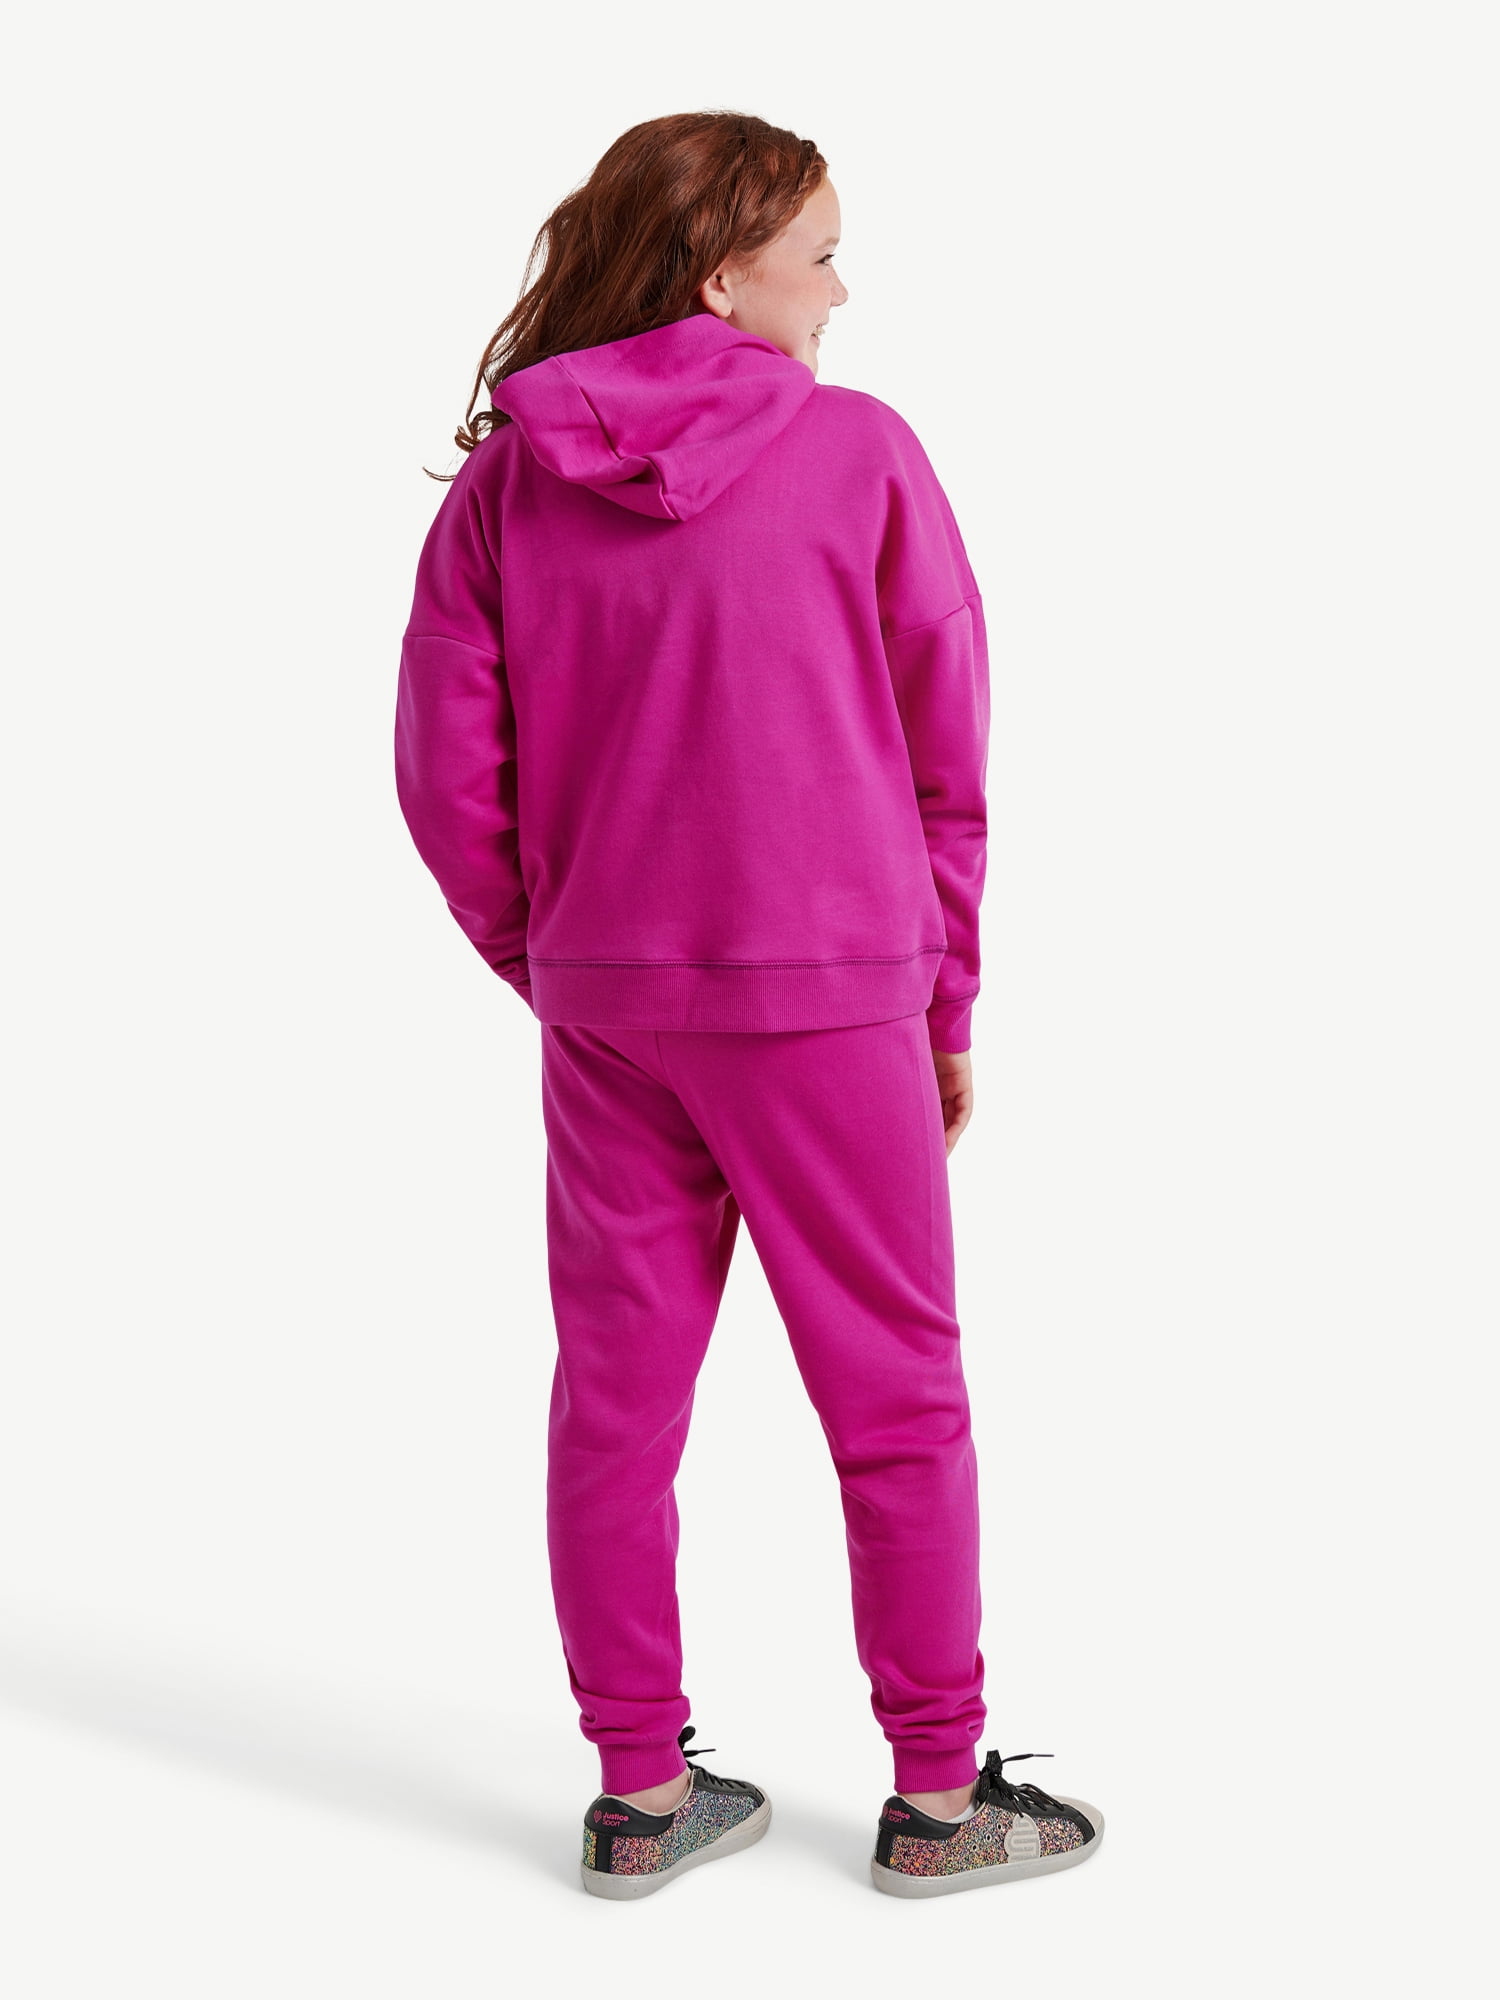 Justice Girls Graphic Hoodie and Jogger, 2-Piece Outfit Set, Sizes XS-XL &  Plus 